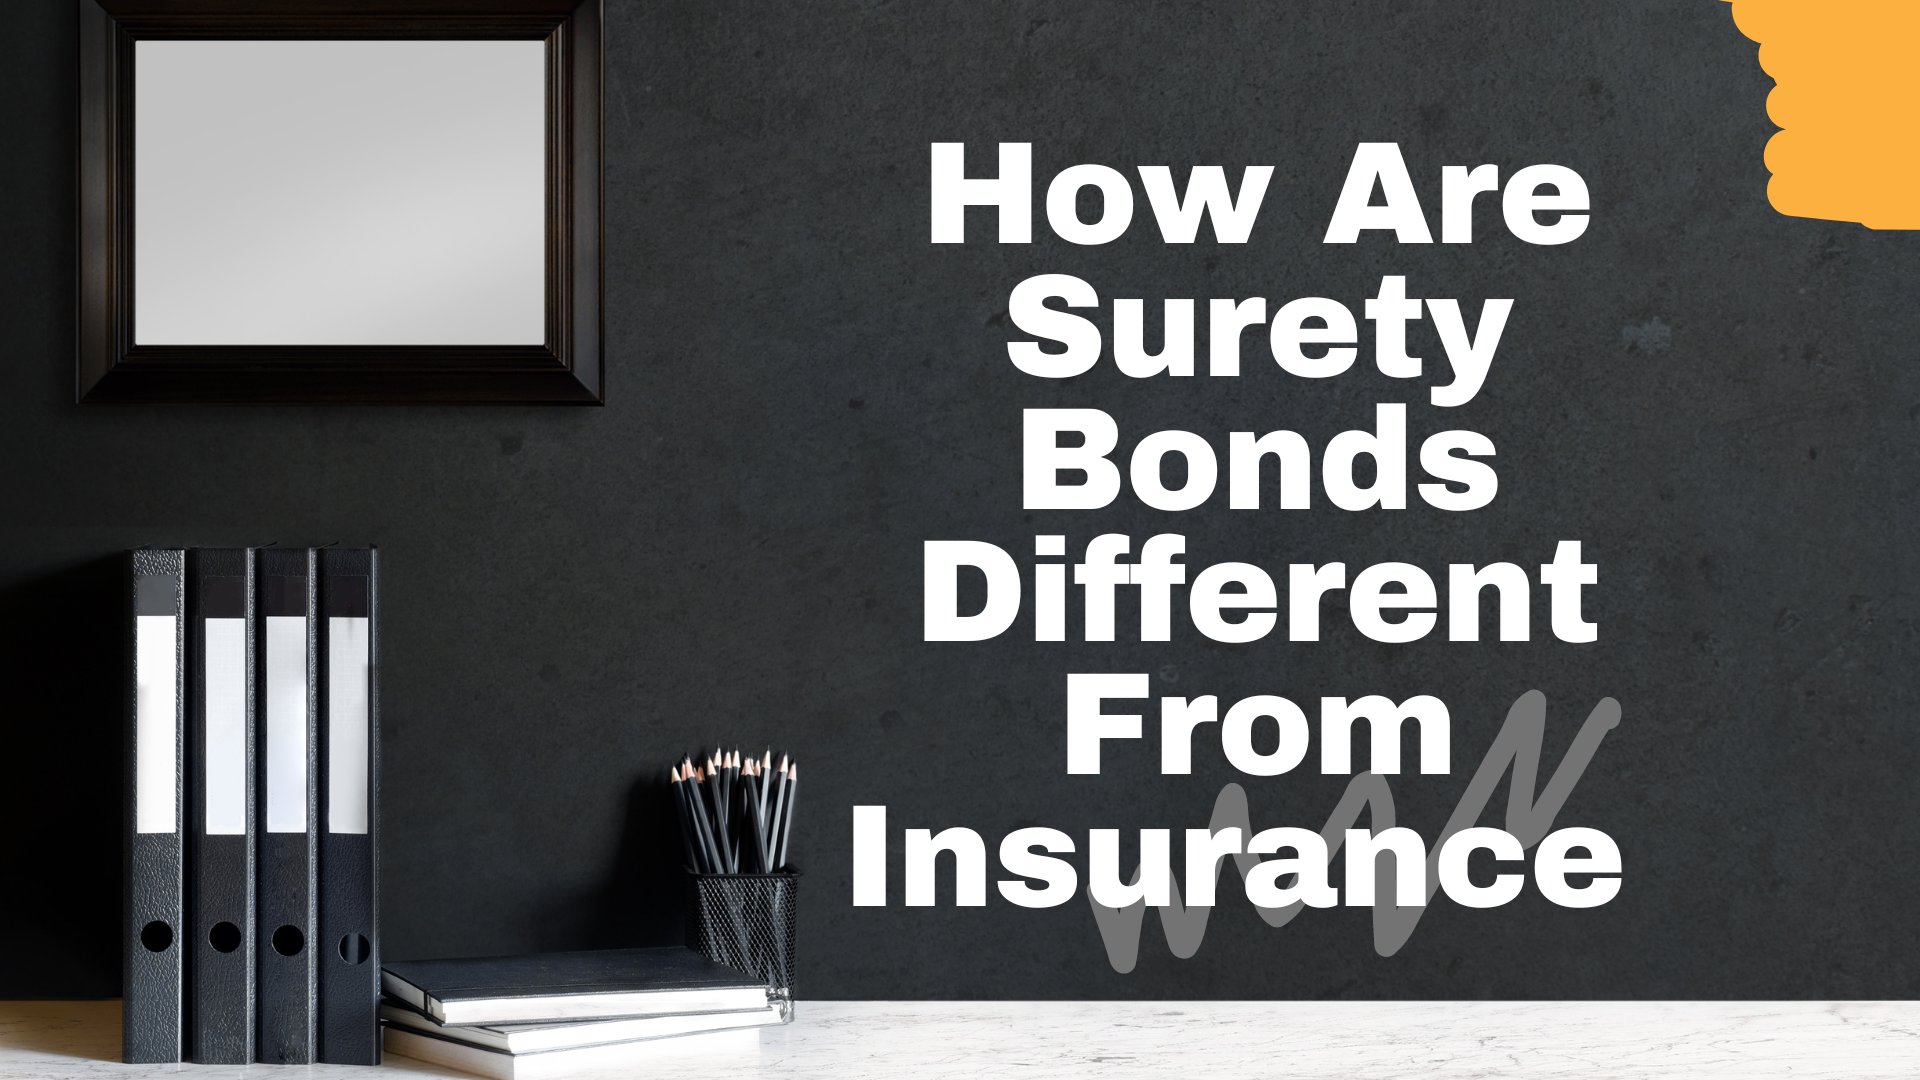 How Are Surety Bonds Different From Insurance